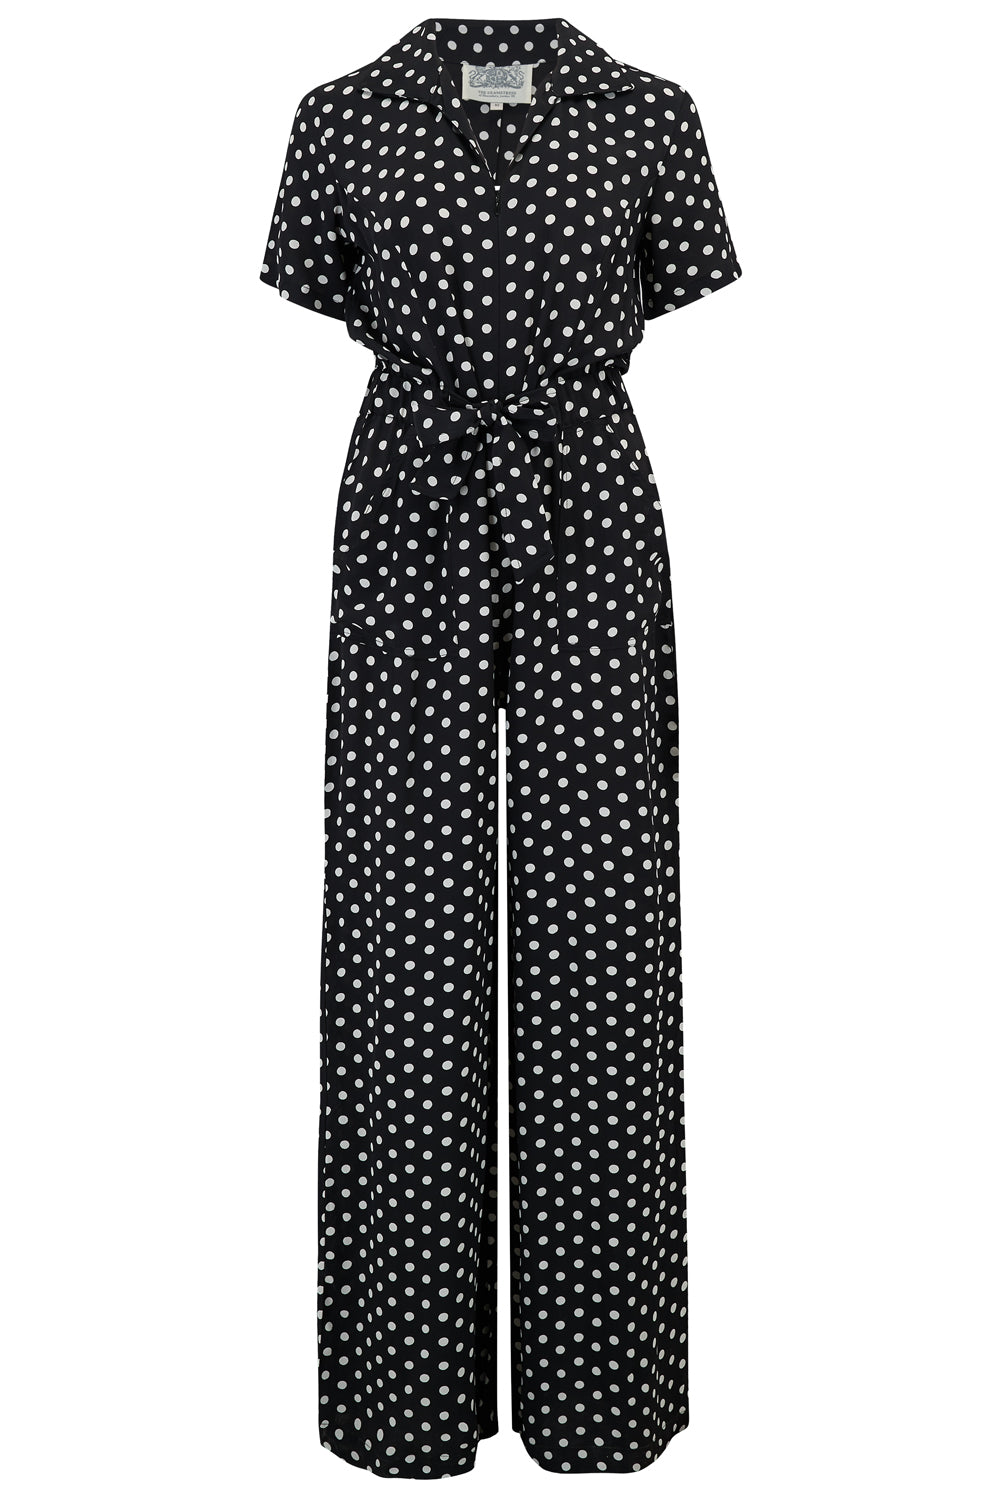 "Lauren" Siren Suit in Black Polka Dot, Authentic & Classic 1940s Style - True and authentic vintage style clothing, inspired by the Classic styles of CC41 , WW2 and the fun 1950s RocknRoll era, for everyday wear plus events like Goodwood Revival, Twinwood Festival and Viva Las Vegas Rockabilly Weekend Rock n Romance The Seamstress Of Bloomsbury